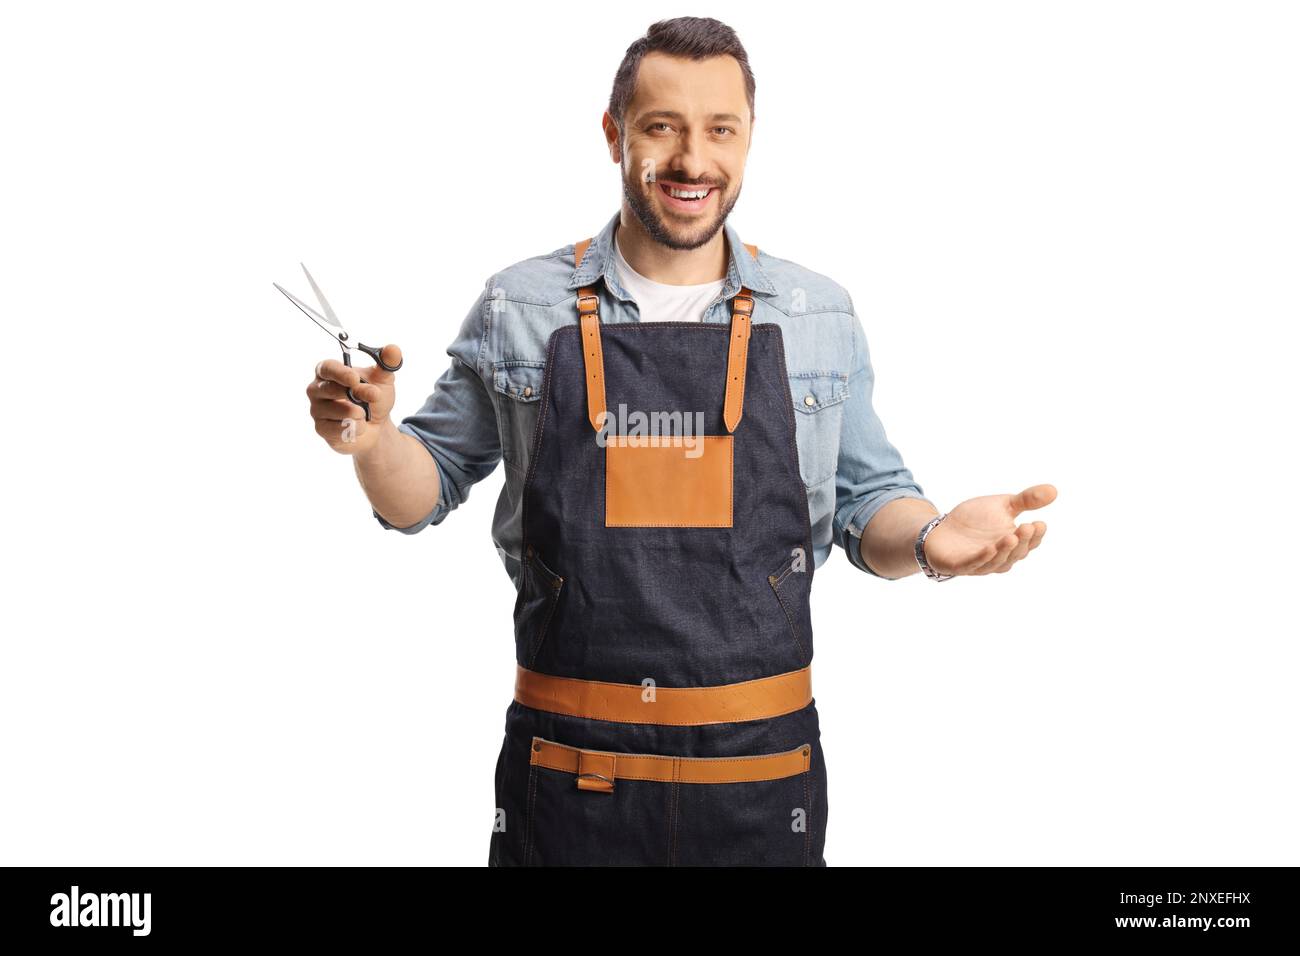 Male hair stylist wearing an apron and holding a pair of scissors isolated on white background Stock Photo